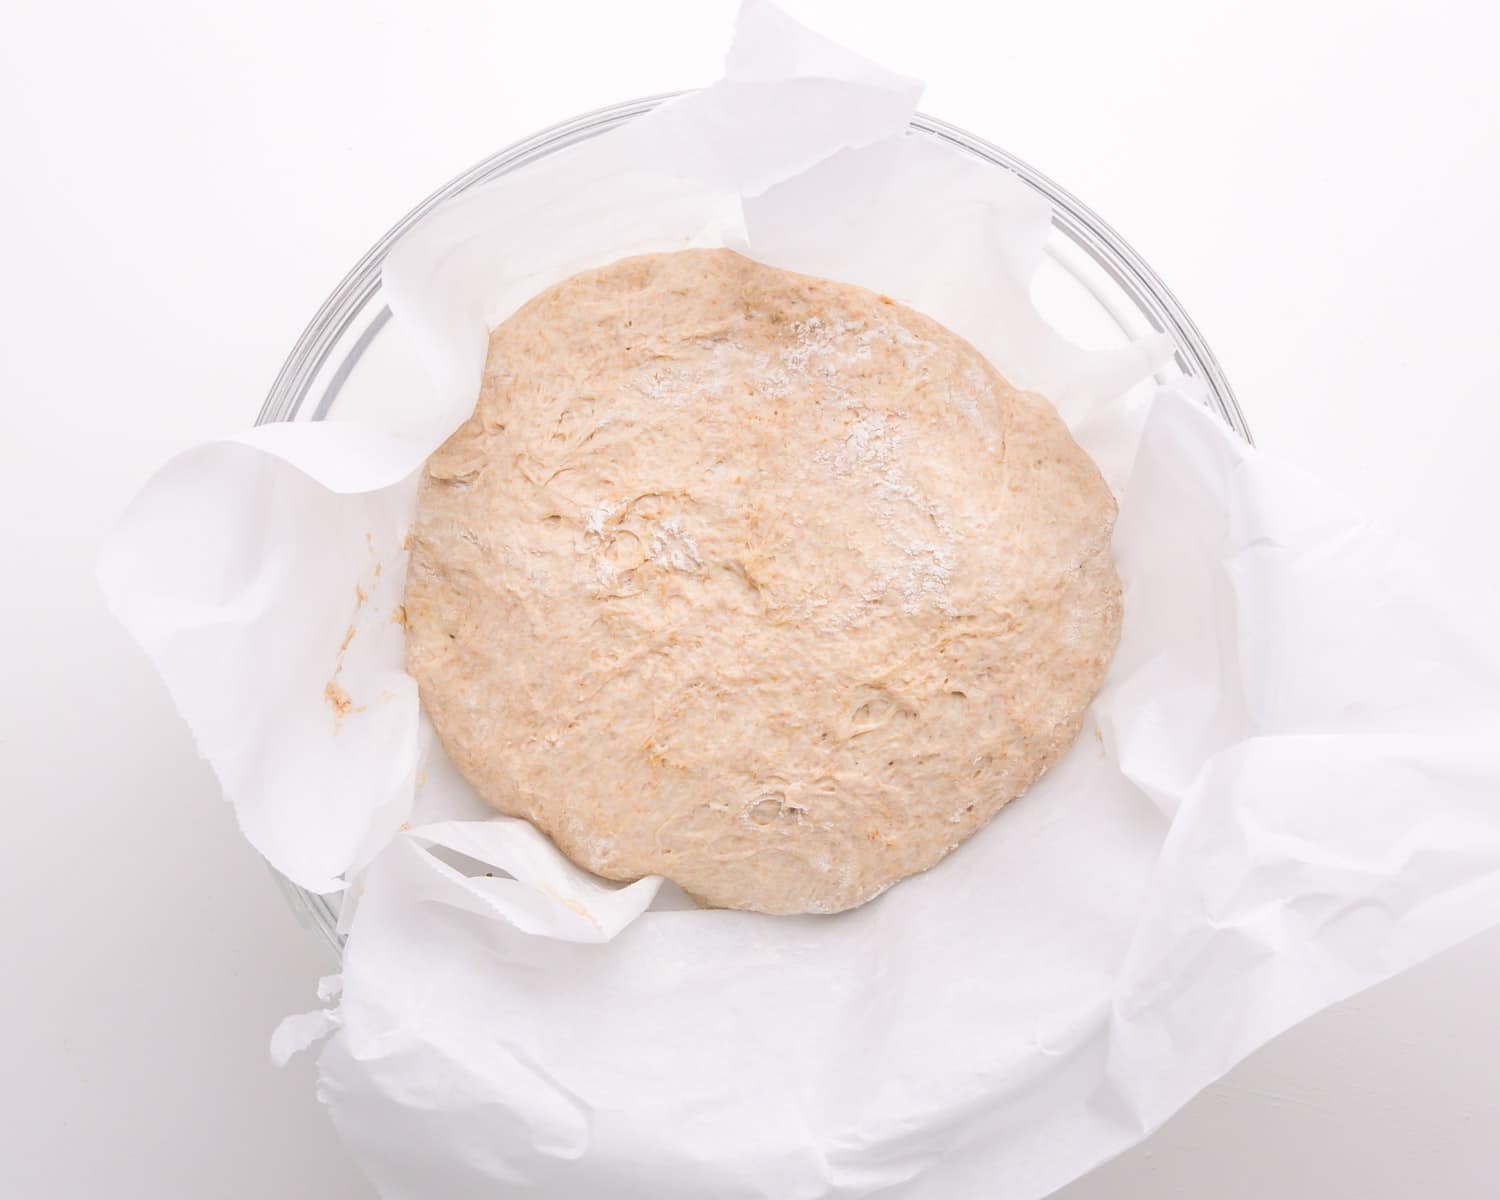 Dough sits on parchment paper, resting in a glass bowl.